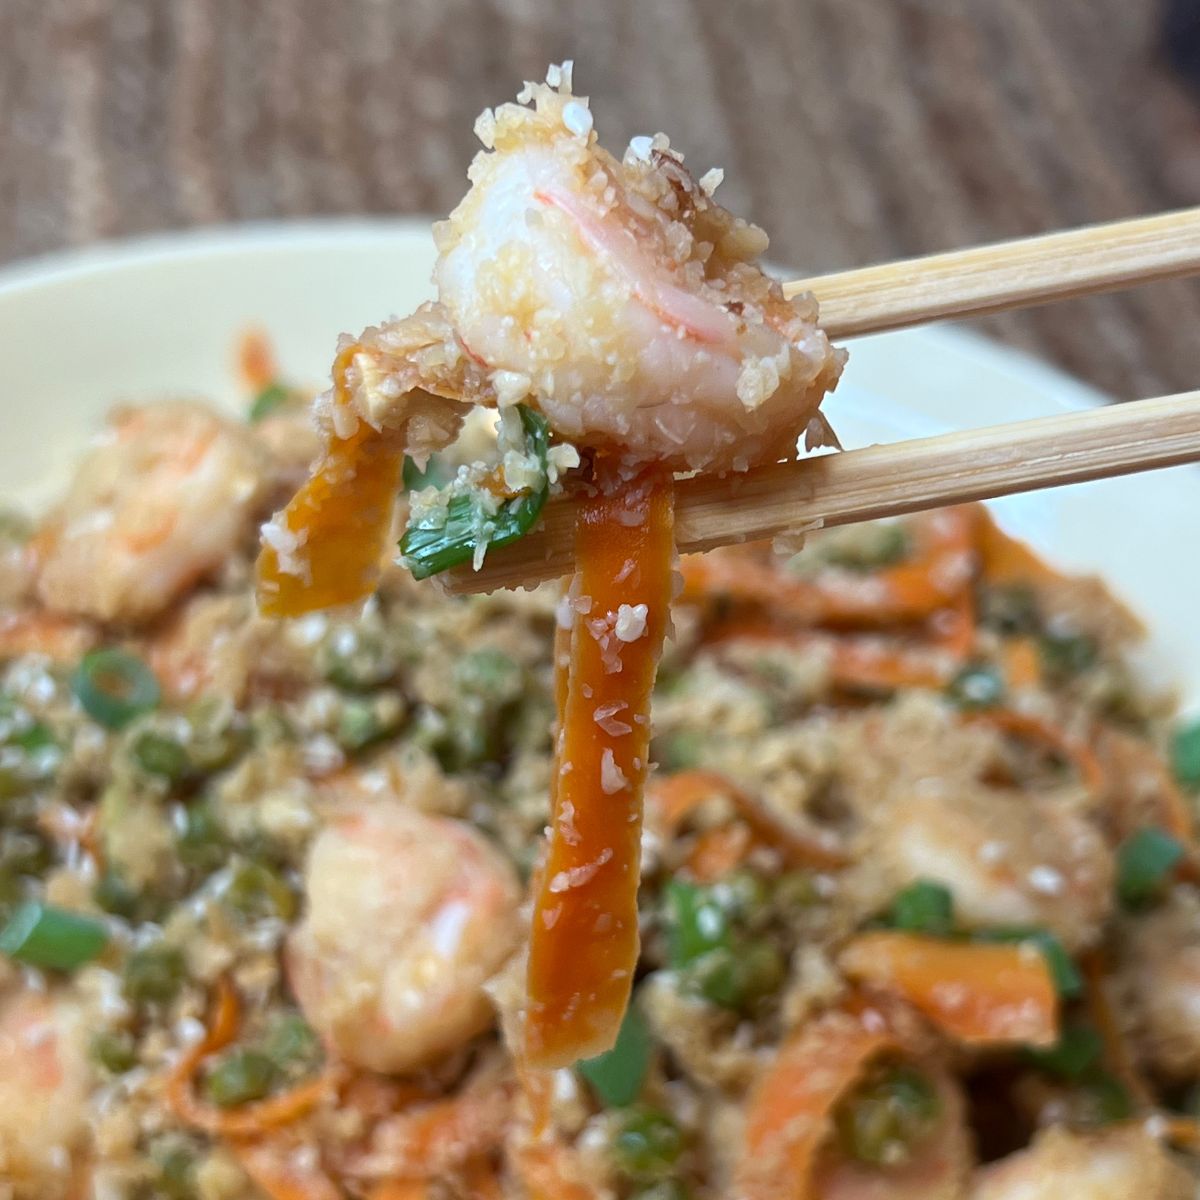 One shrimp being picked up with chopsticks over a bowl of cauliflower fried rice